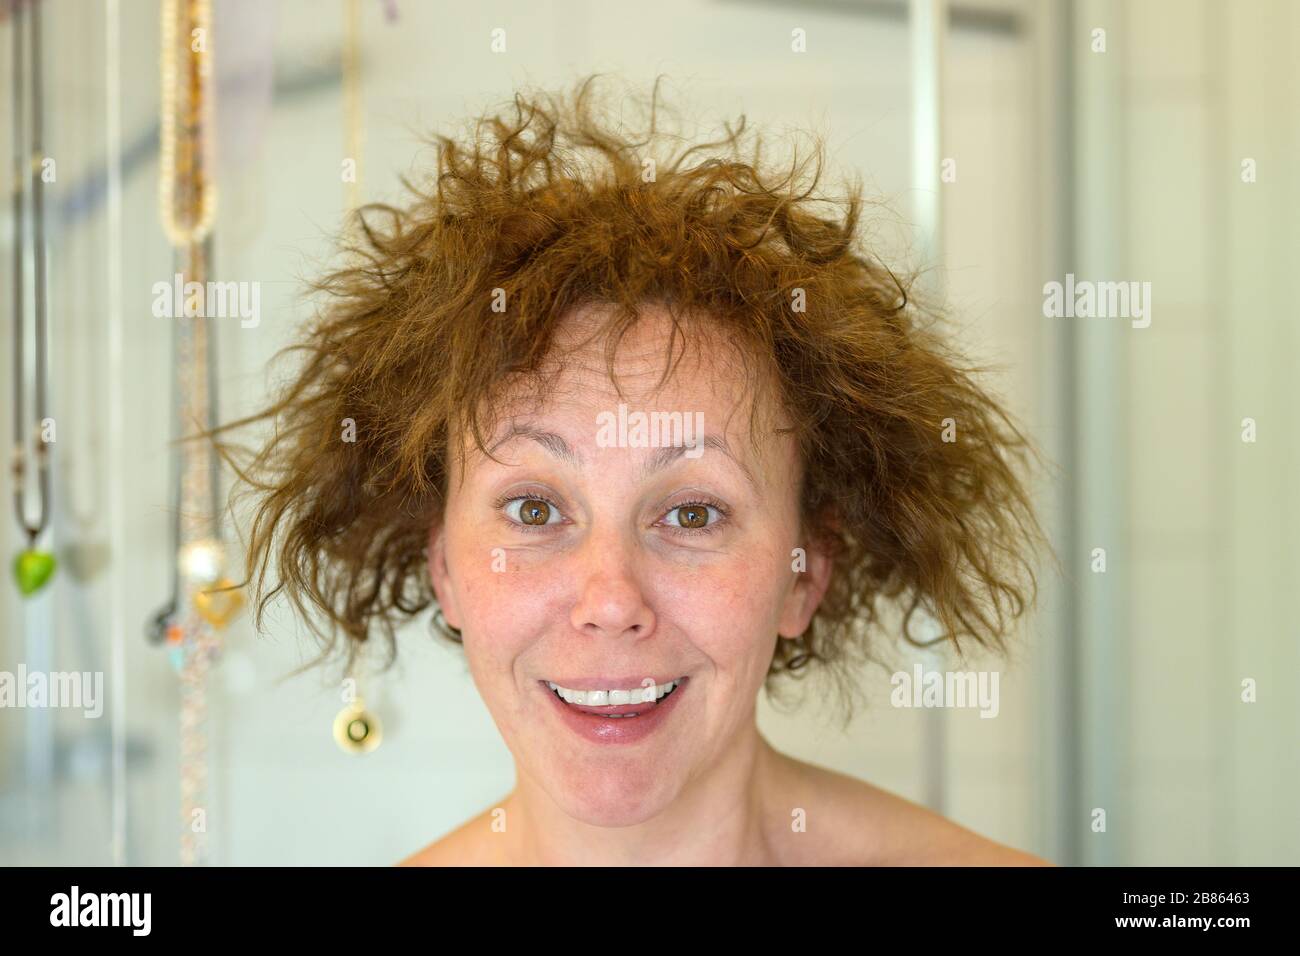 Charismatic laughing woman having a bad hair day with her tousled unruly curly  hair flying out in a frizz in a close up bathroom portrait Stock Photo -  Alamy